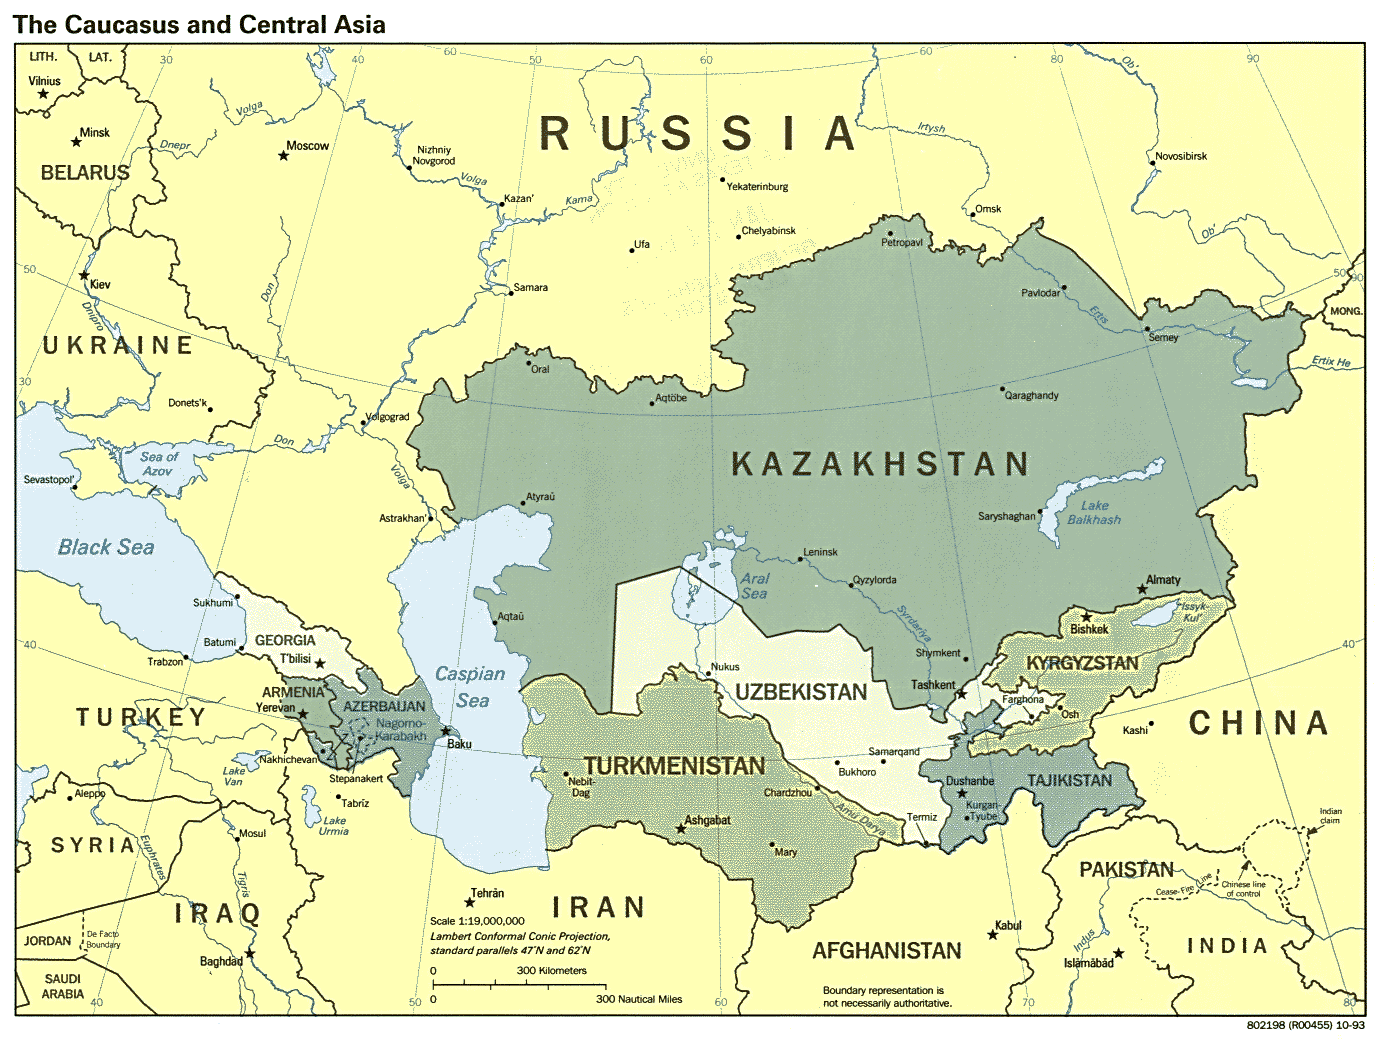 Map Of Azerbaijan. Caucasus and Central Asia [Political Map] 1993 (223K) 